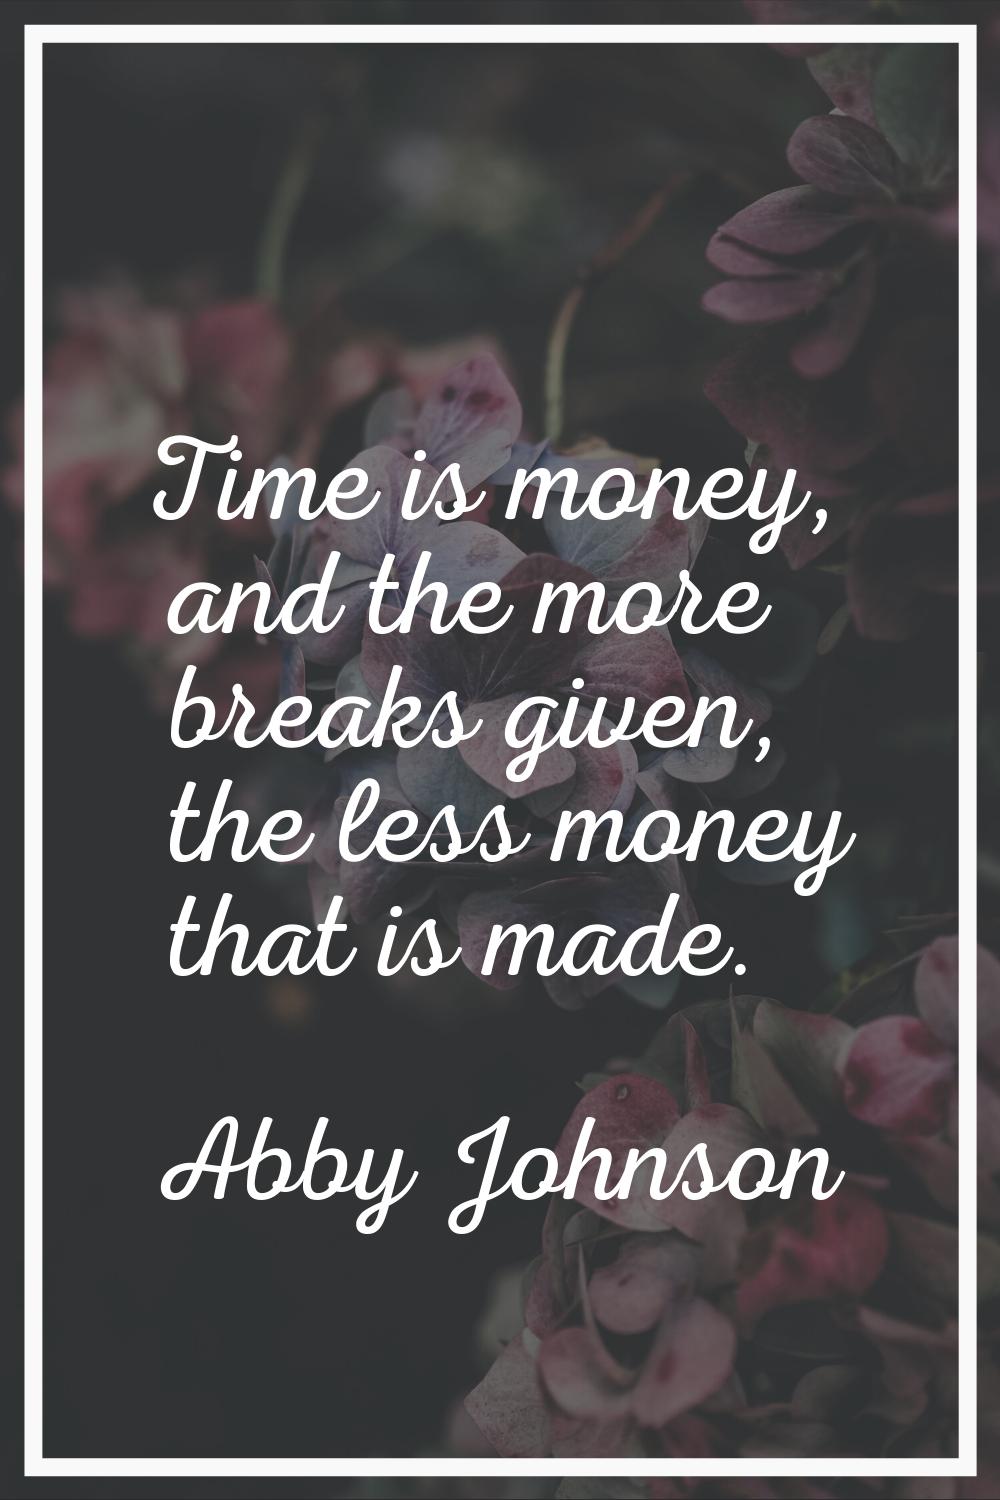 Time is money, and the more breaks given, the less money that is made.